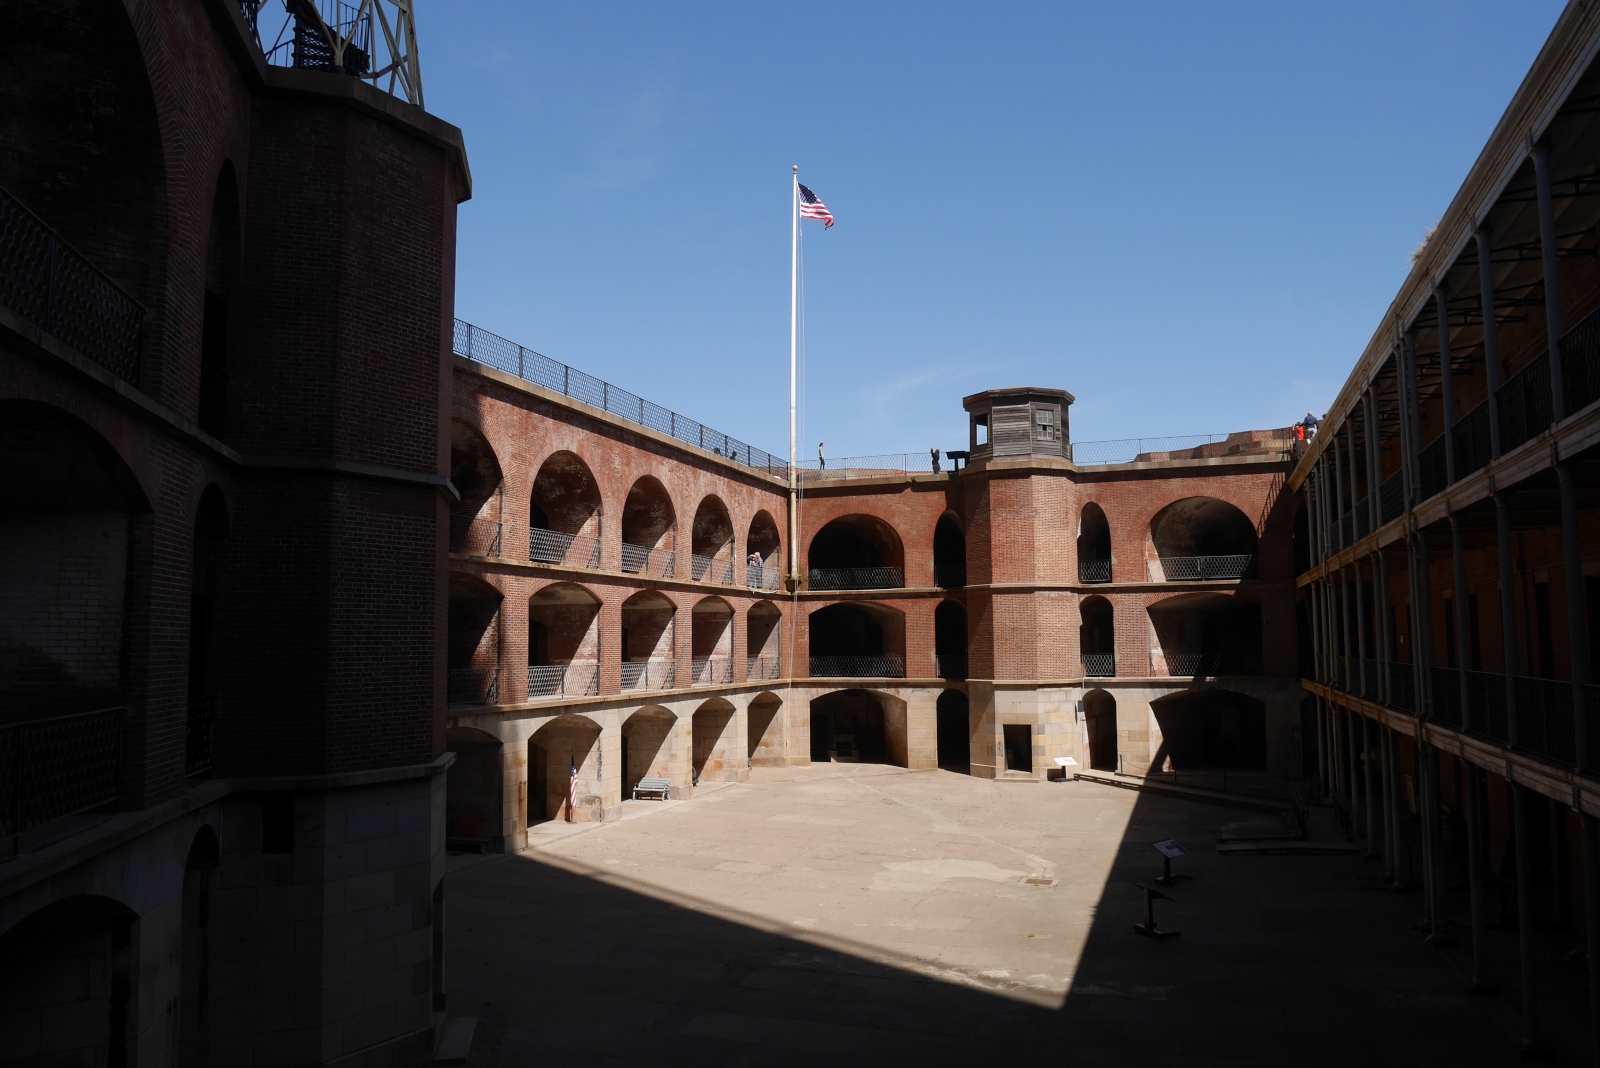 View of the parade ground inside Fort Point. The three arched tiers around the courtyard are the casemates, where the guns were mounted to protect against enemy ships.